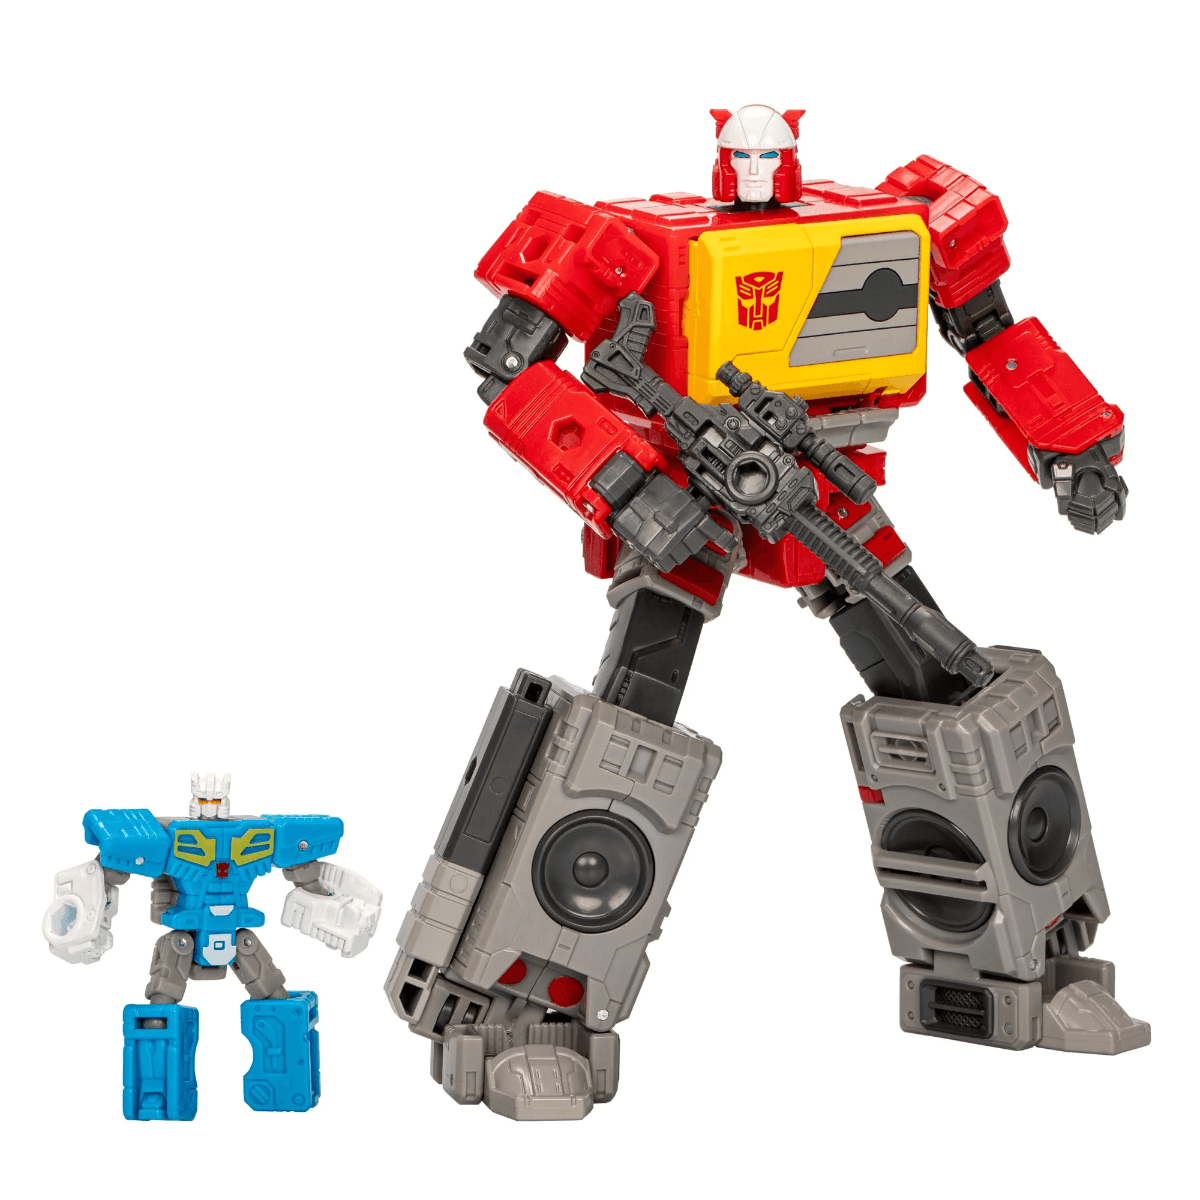 26504 Transformers Studio Series Voyager: The Movie 86-25 Autobot Blaster & Eject - Hasbro - Titan Pop Culture